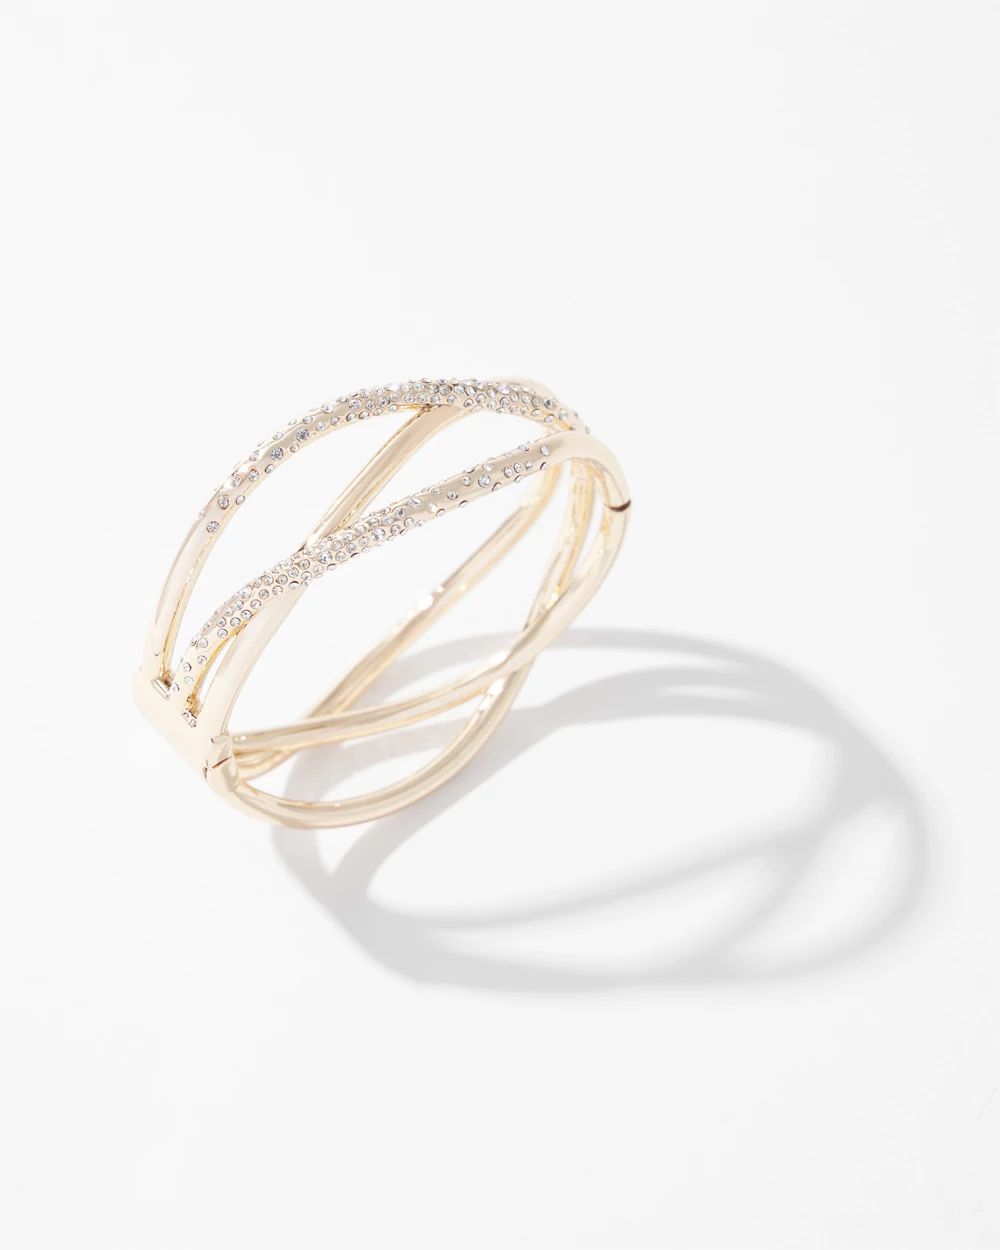 Gold Dusted Pave Cuff Bracelet